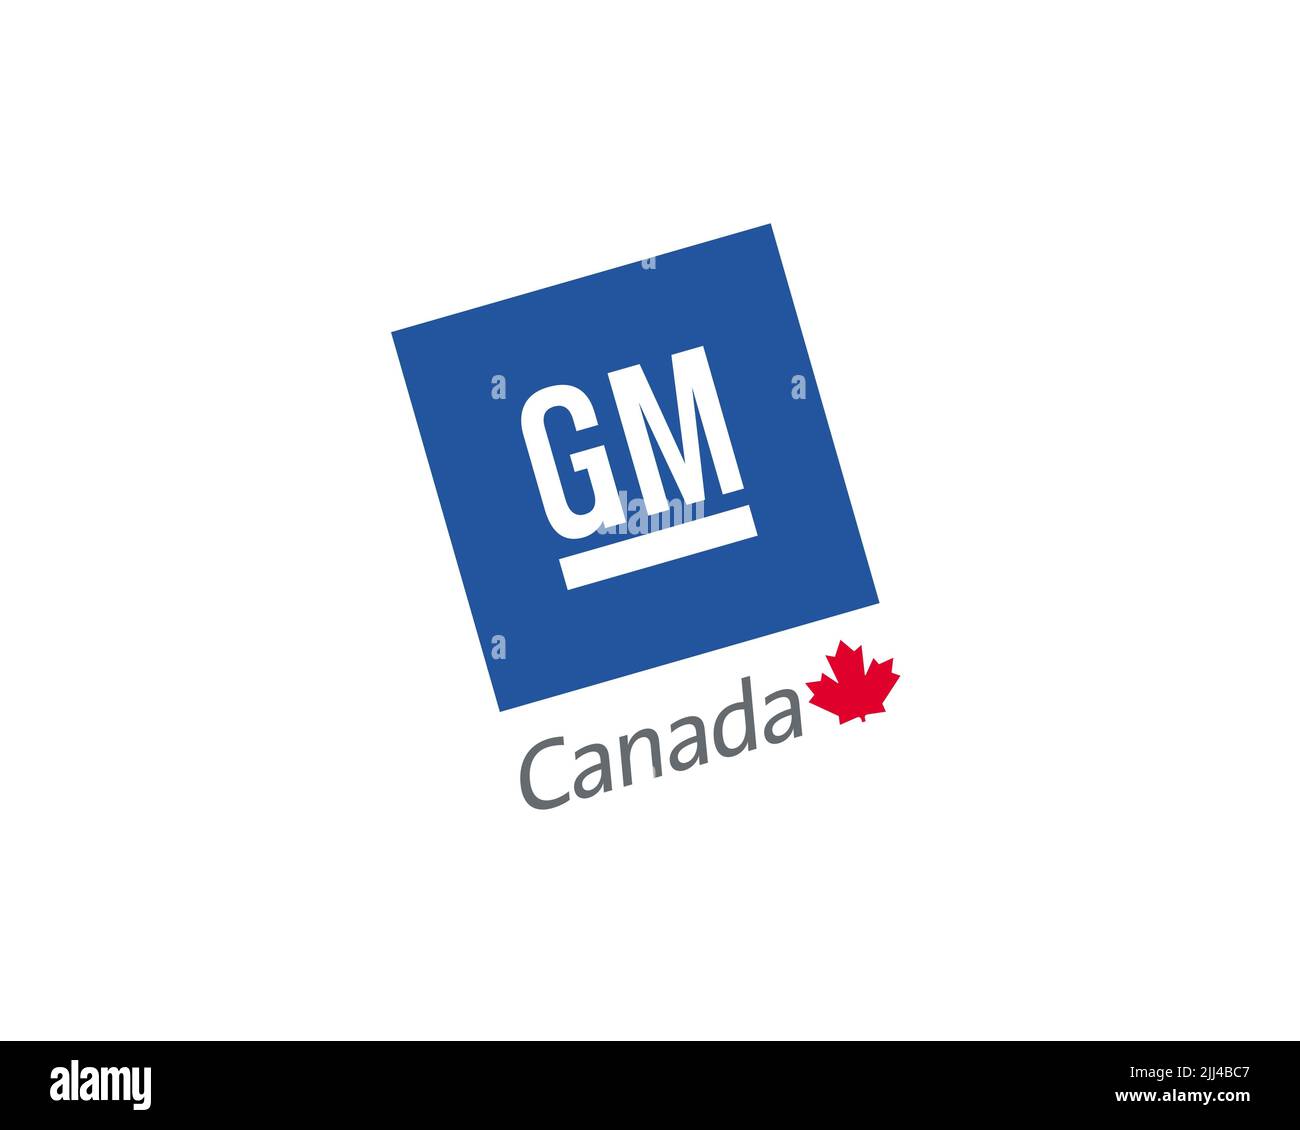 General motors logo canada Cut Out Stock Images & Pictures - Alamy